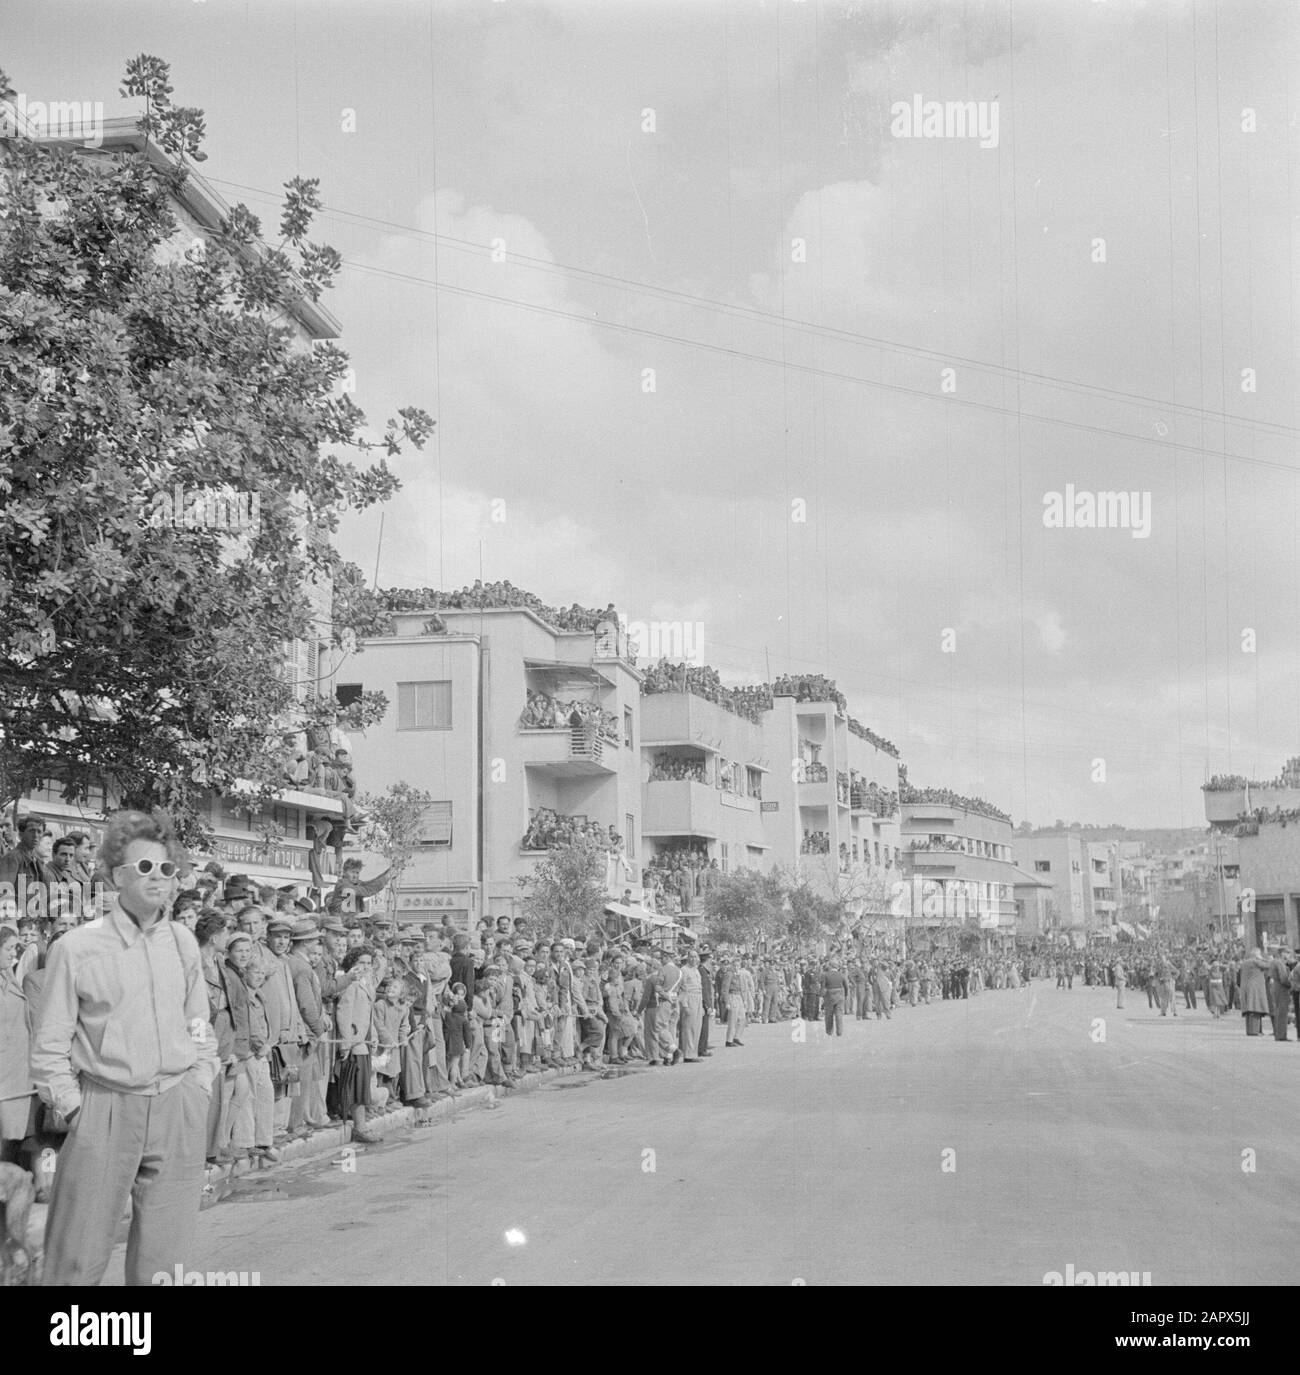 Israel 1948-1949: Haifa  Audience during the military parade in Haifa on the occasion of the first anniversary of Israel's independence on May 15, 1949 Date: May 15, 1949 Location: Haifa, Israel Keywords: architecture, military parades, national holidays, public Stock Photo